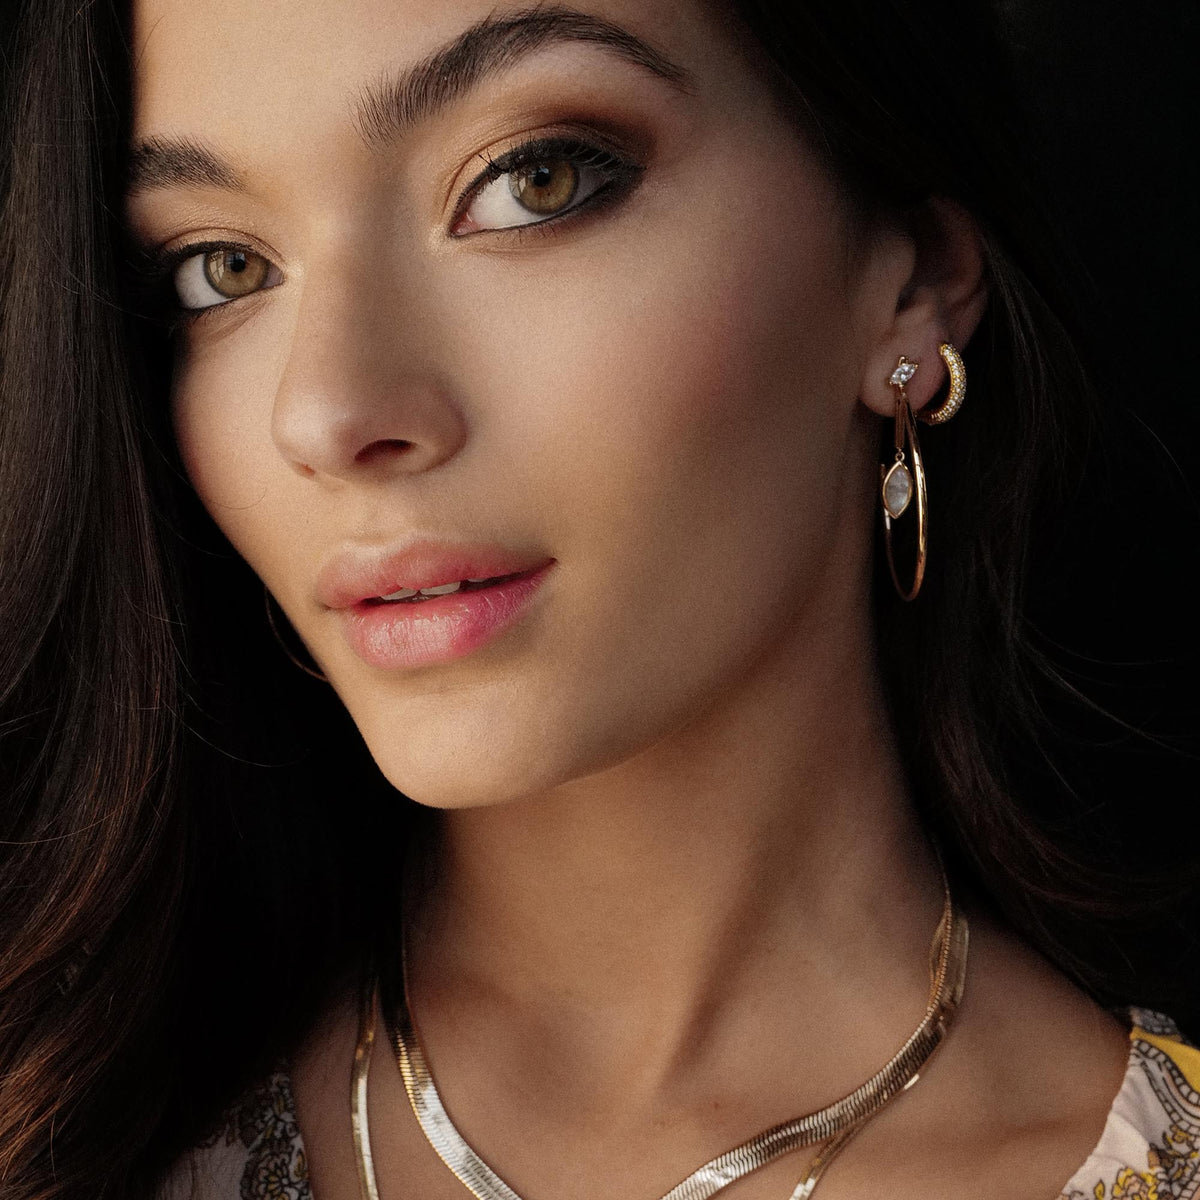 Marquise Dangle Hoops - Mother of Pearl